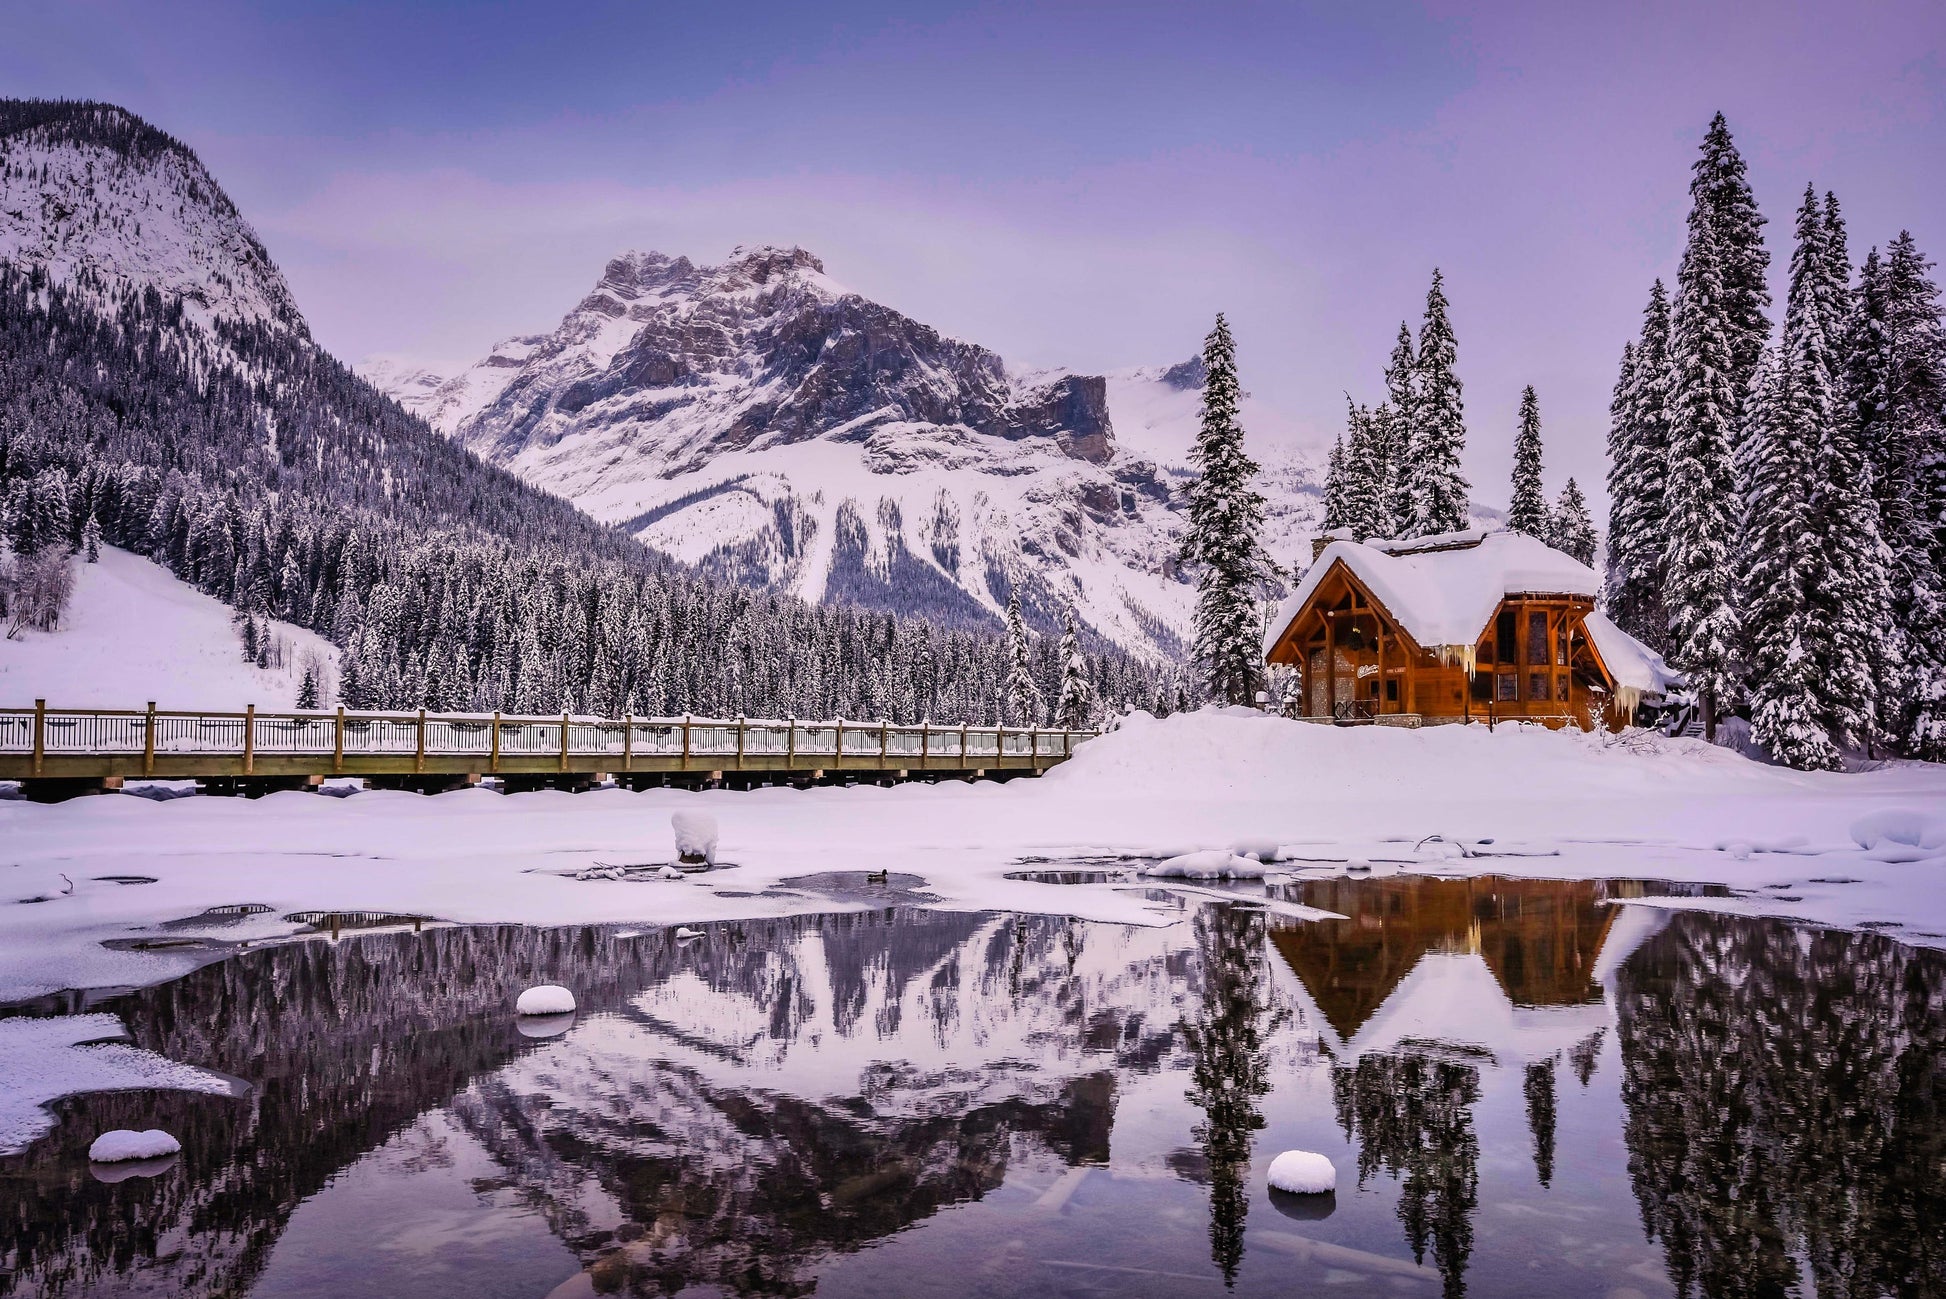 Emerald Lake in Yolo, Canada - Landscape Photography, Banff National Park, Color Print, Blue Hour